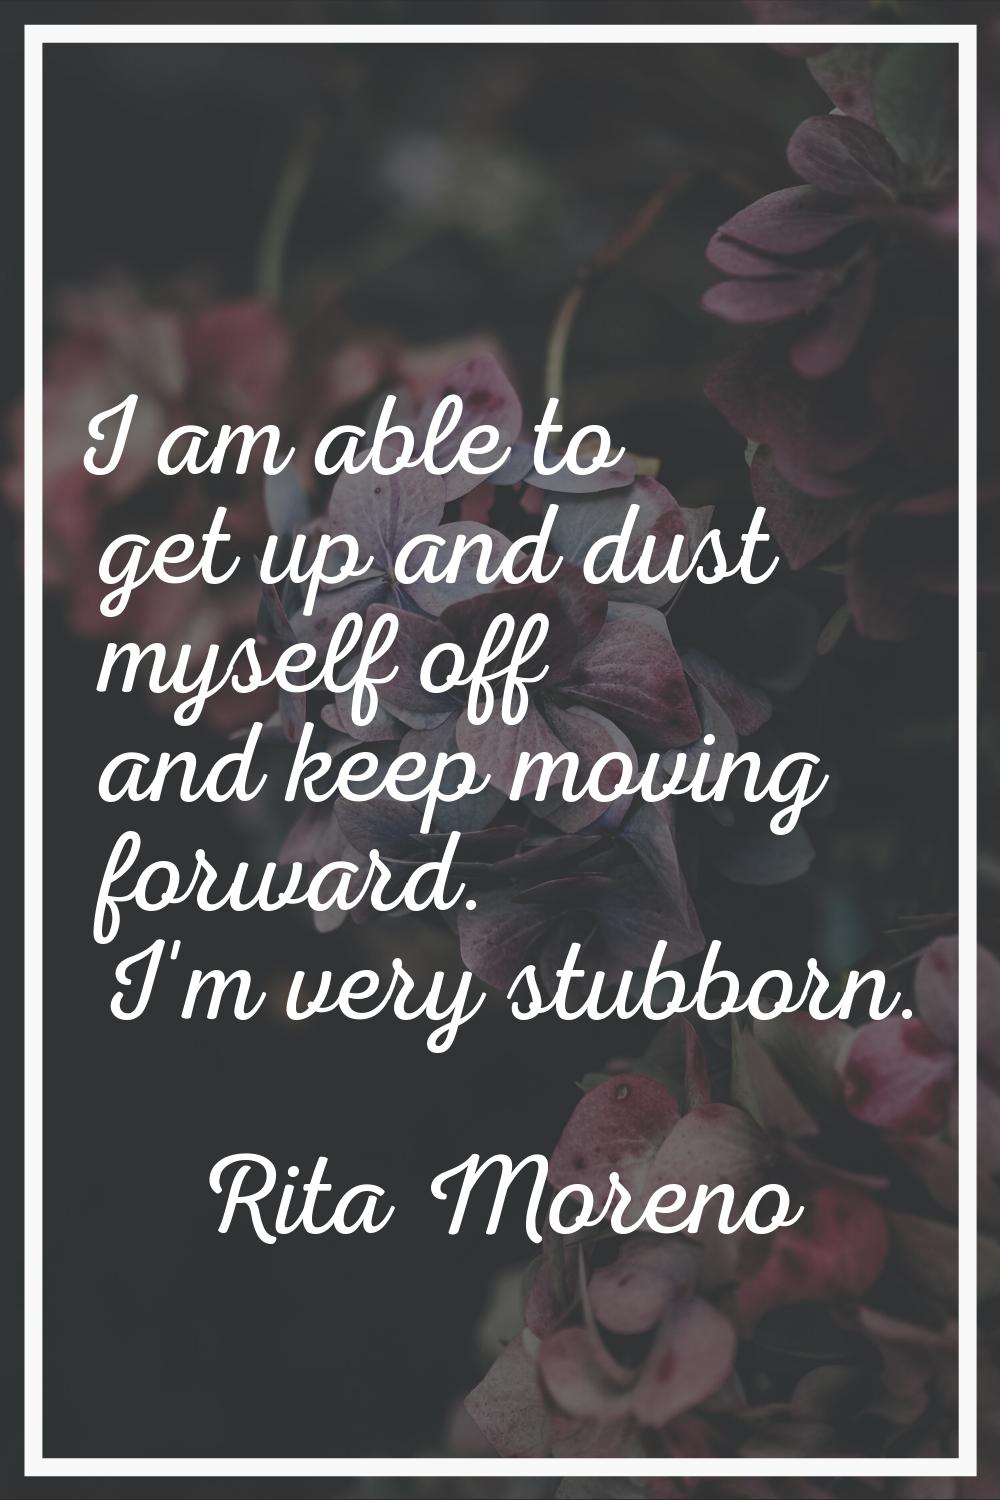 I am able to get up and dust myself off and keep moving forward. I'm very stubborn.